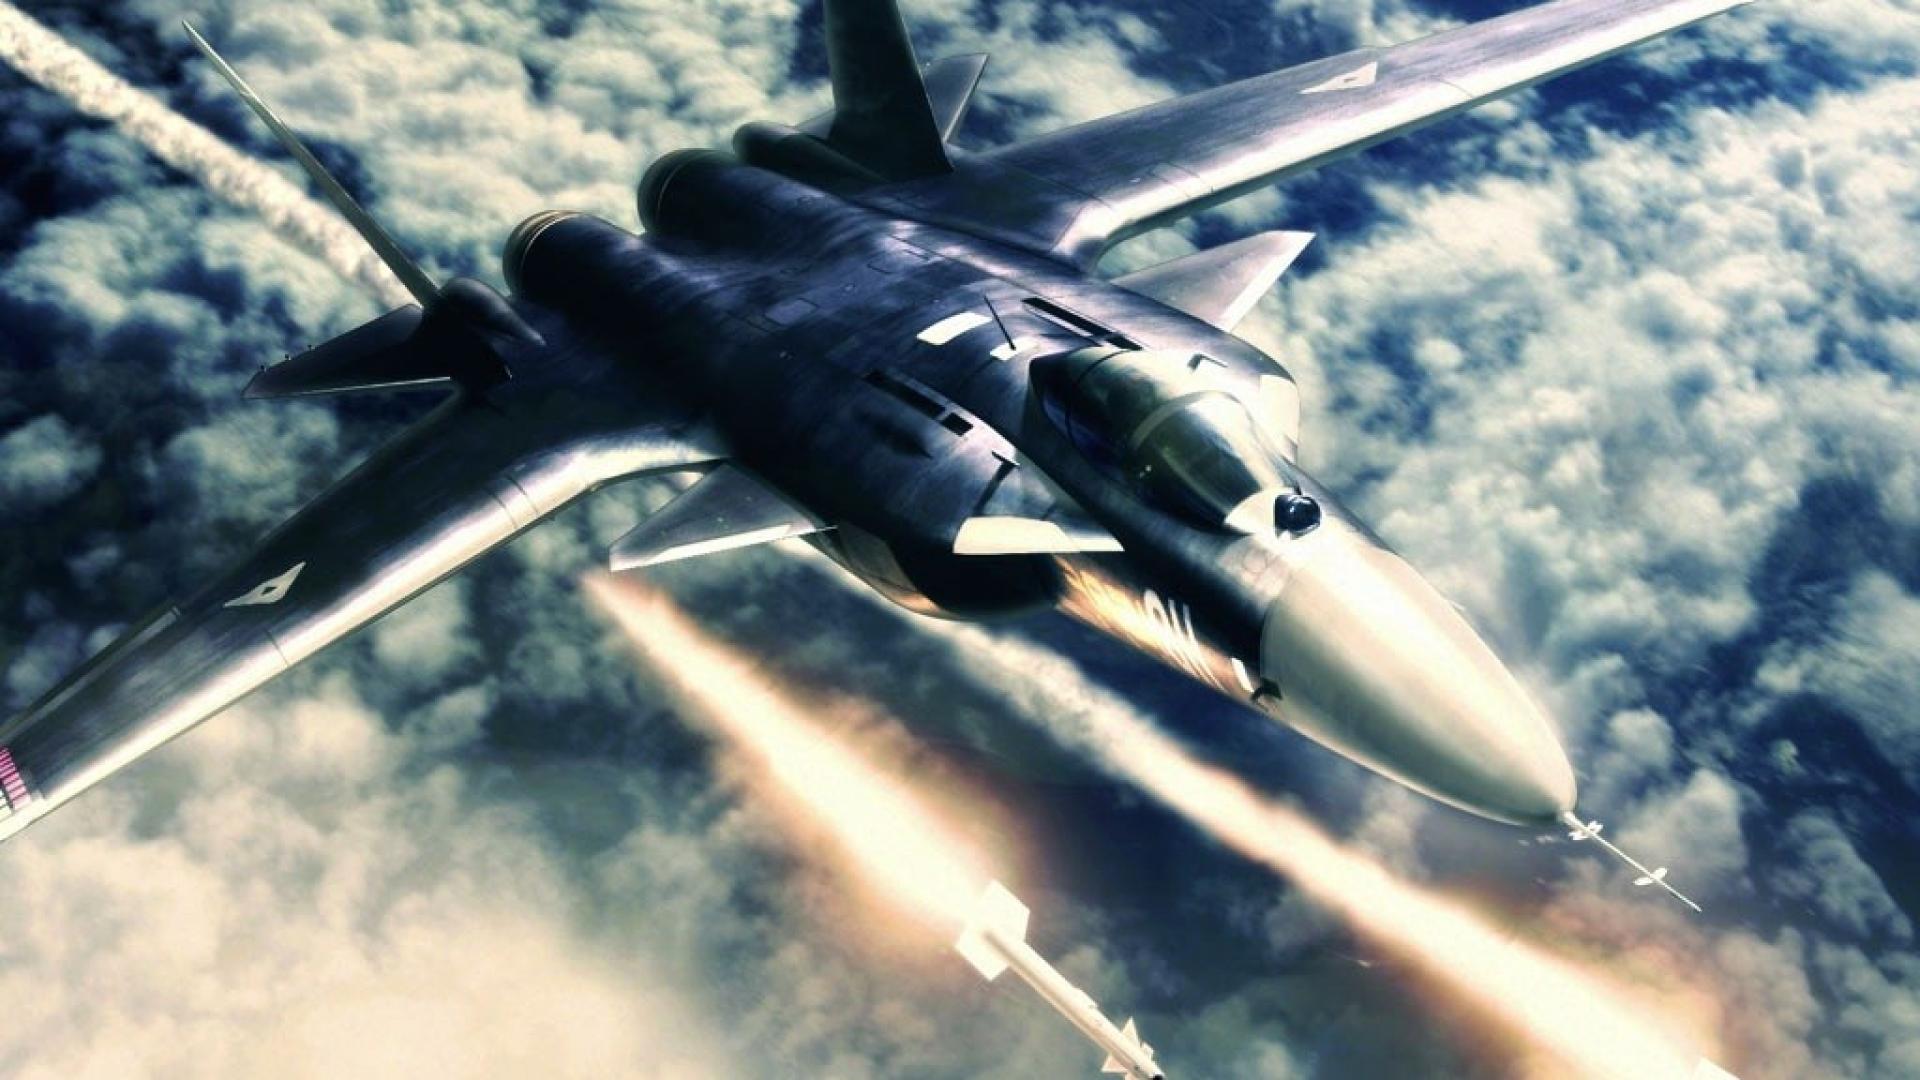 ace, Combat, Game, Jet, Airplane, Aircraft, Fighter, Plane, Military, Battle, Weapon, Missile, Sky, Clouds Wallpaper